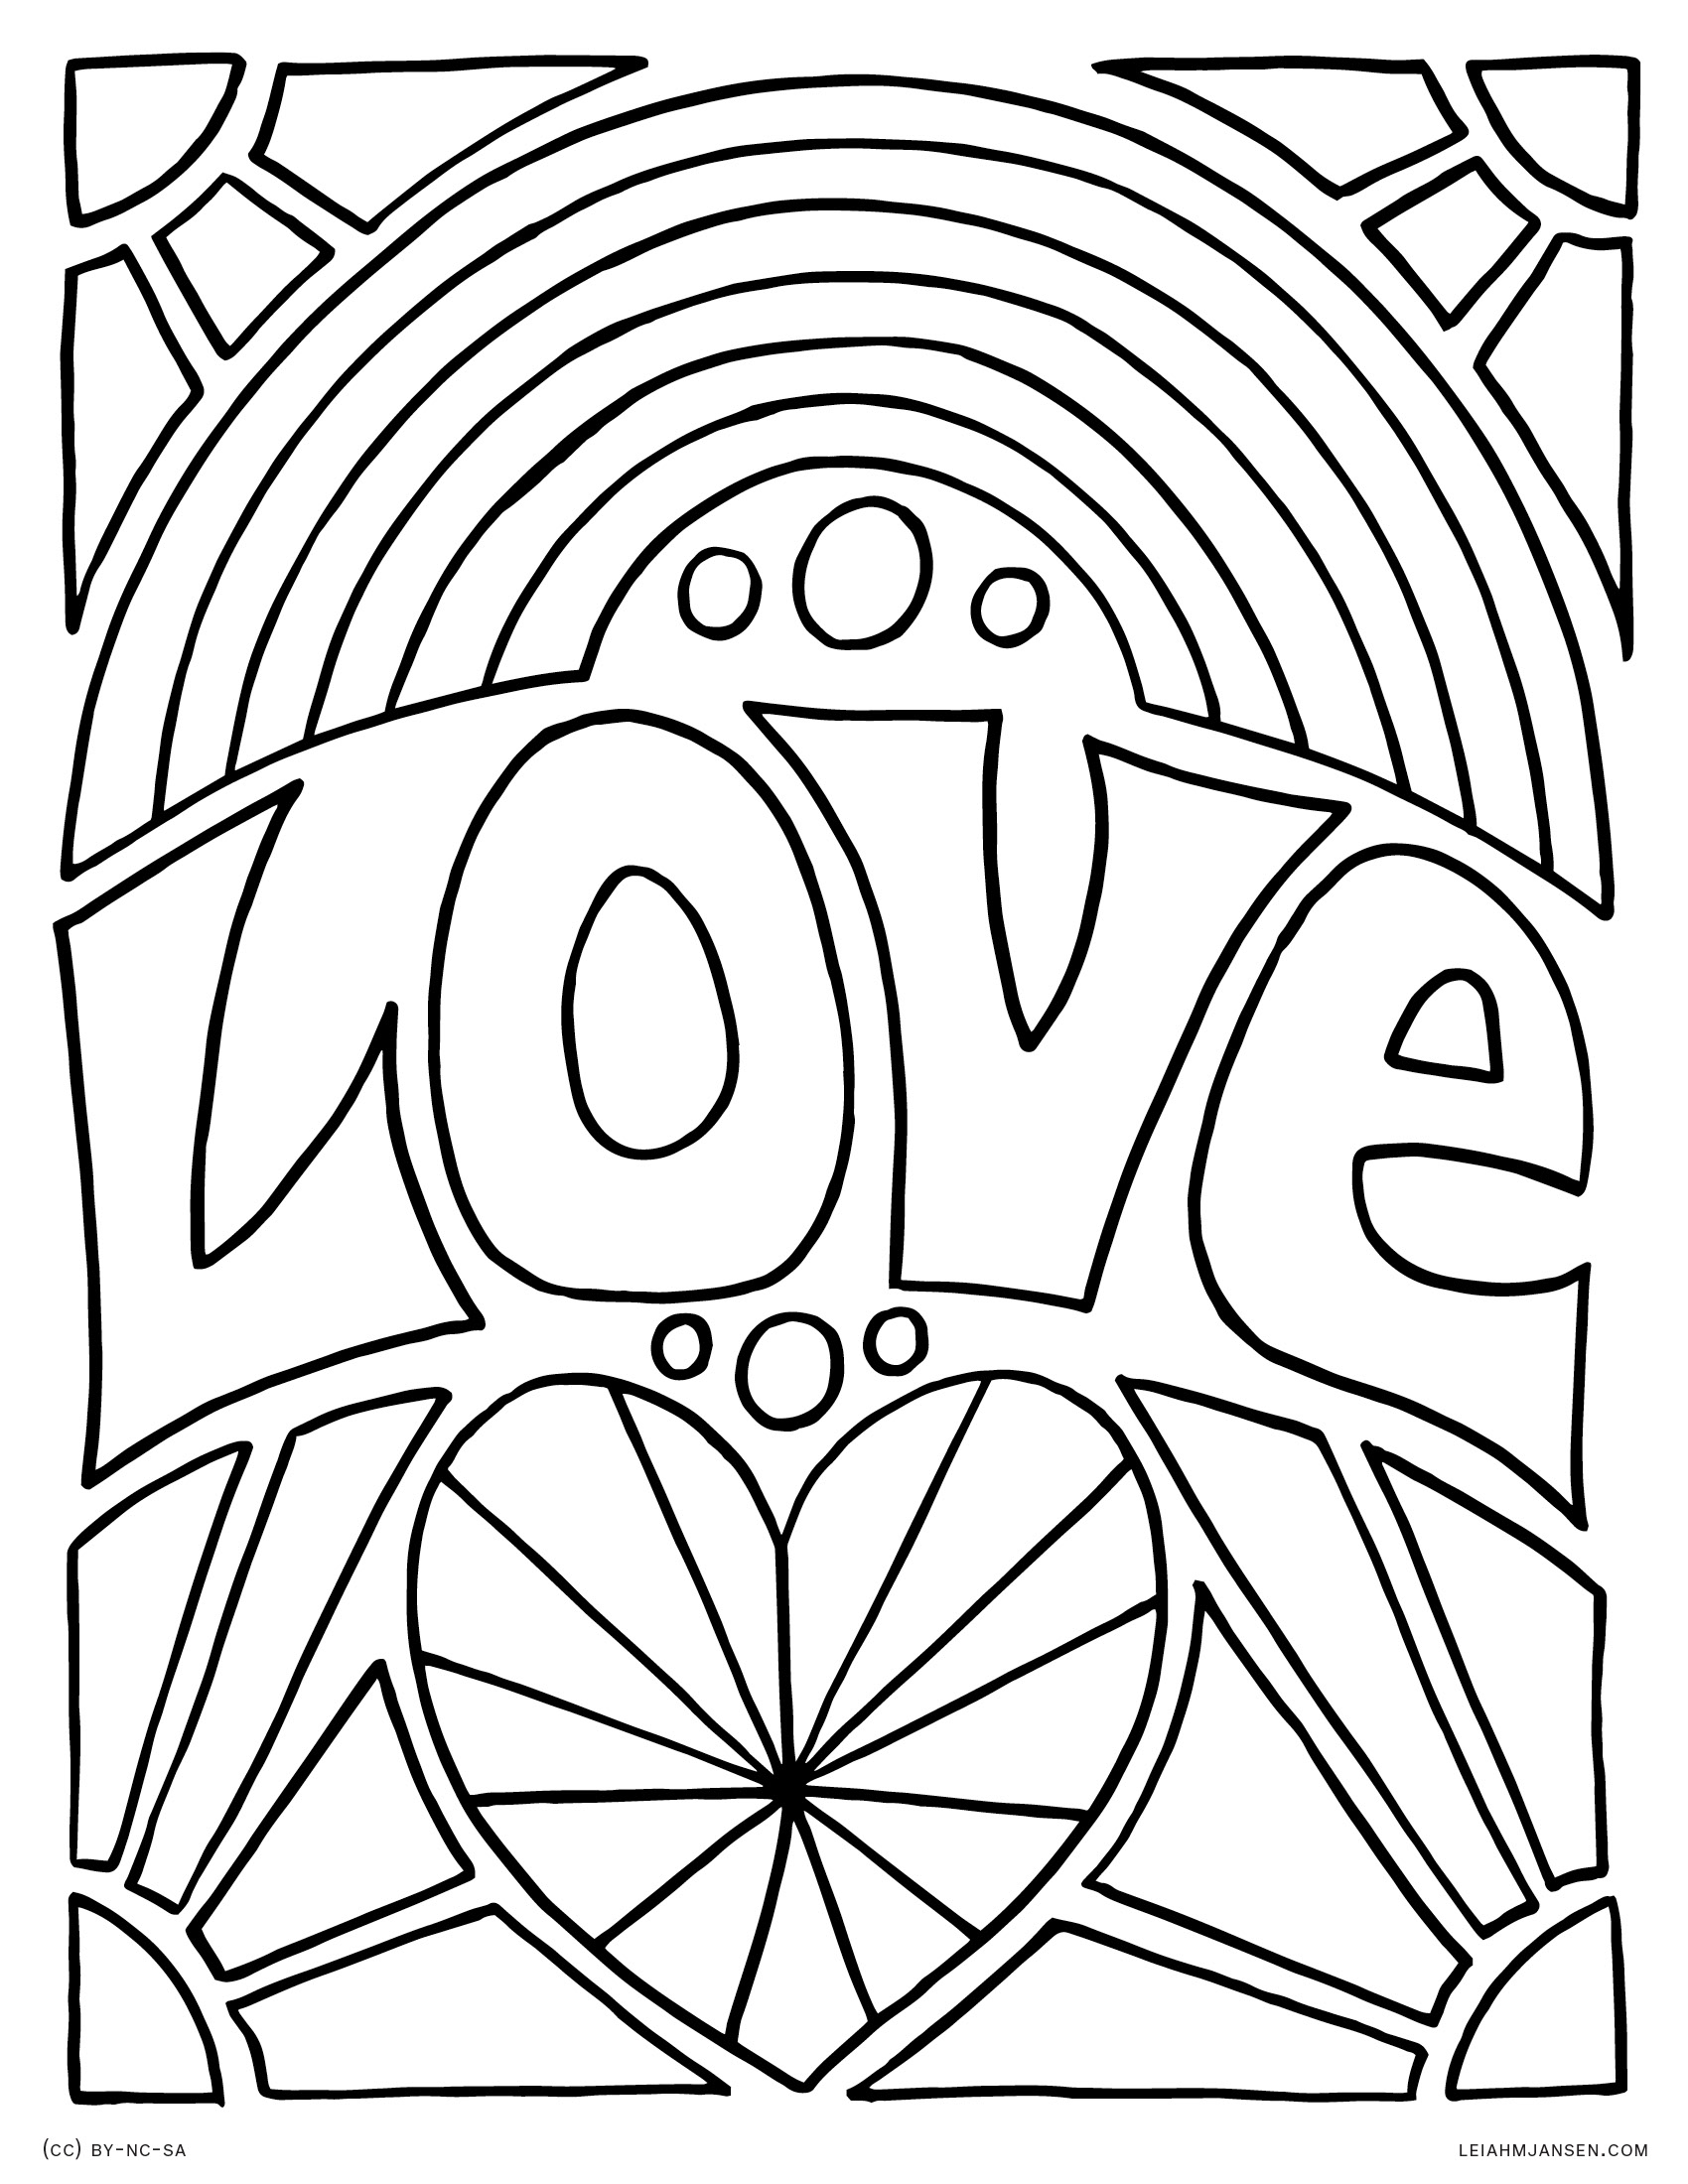 Ou Coloring Pages 28 Images 1000 Oklahoma Sooners Logo Basketball